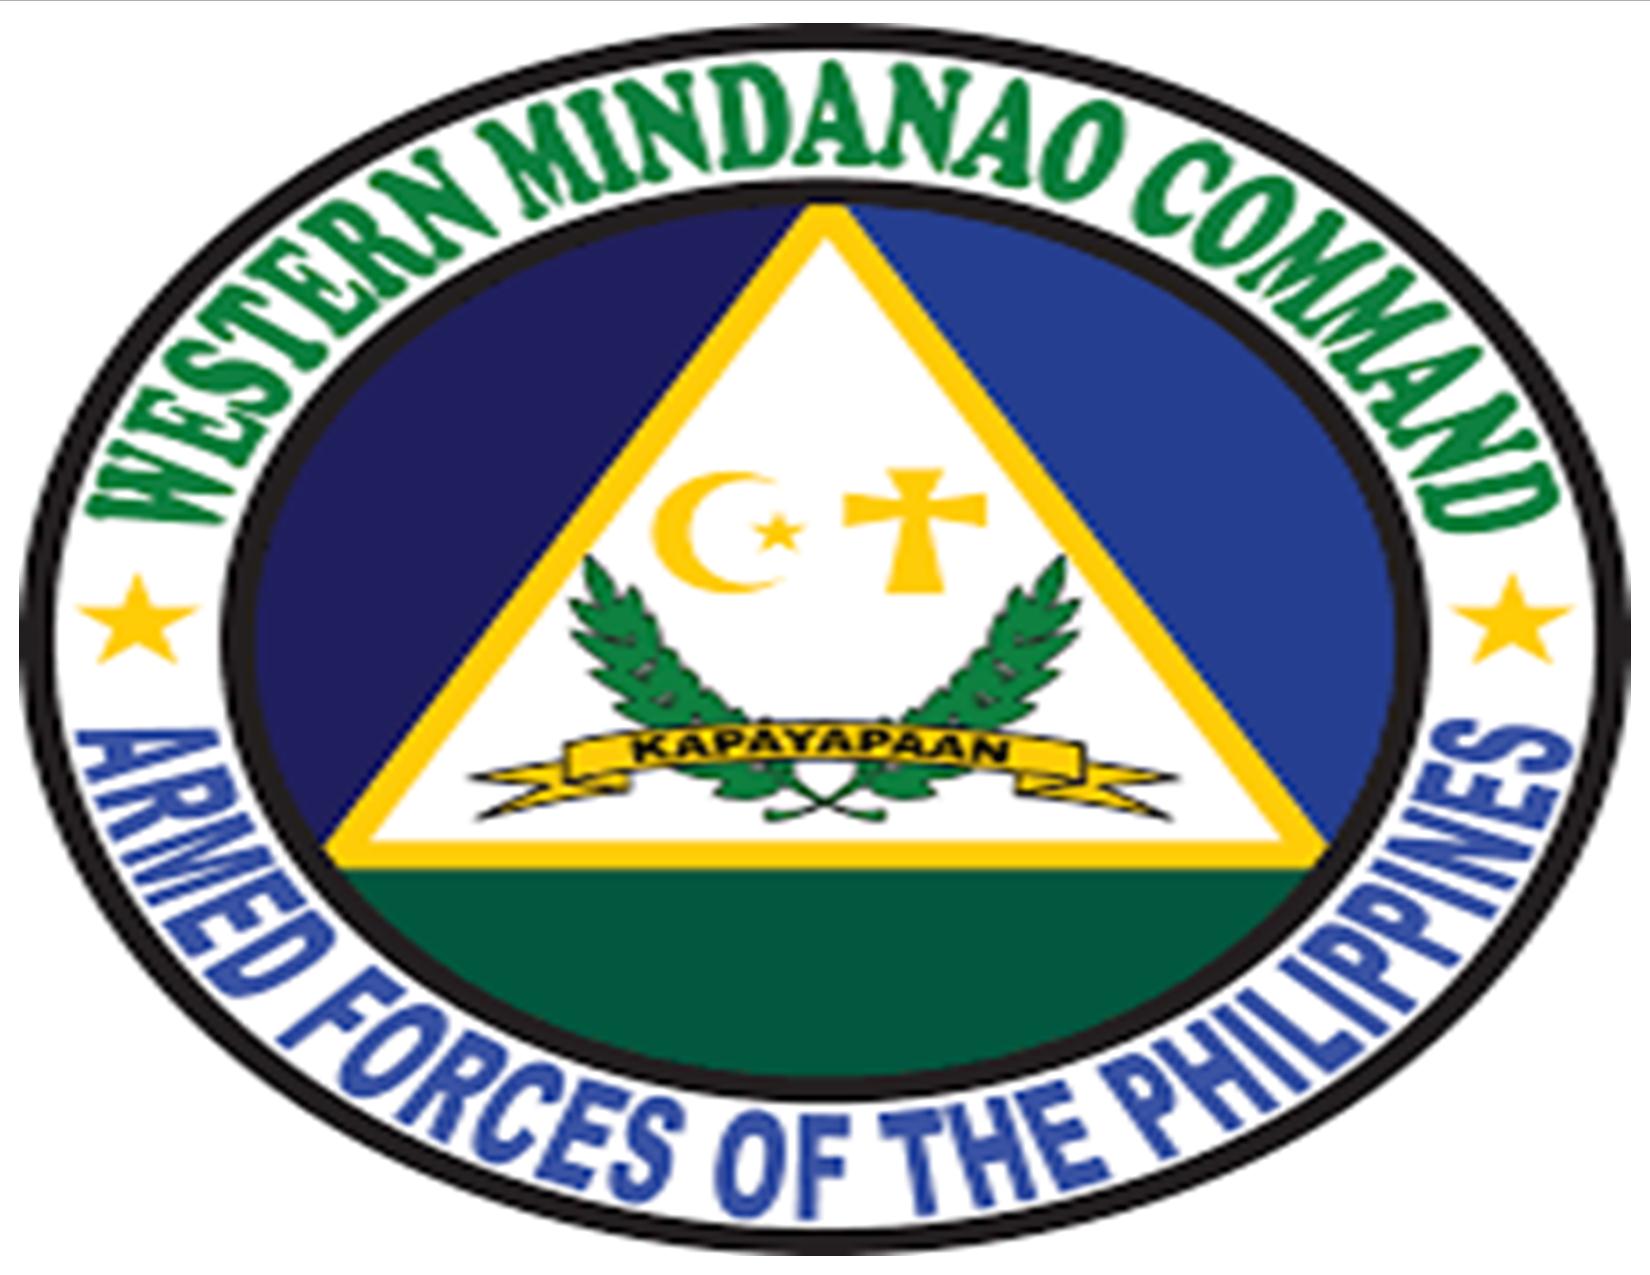 armed forces of the philippines- western mindanao command